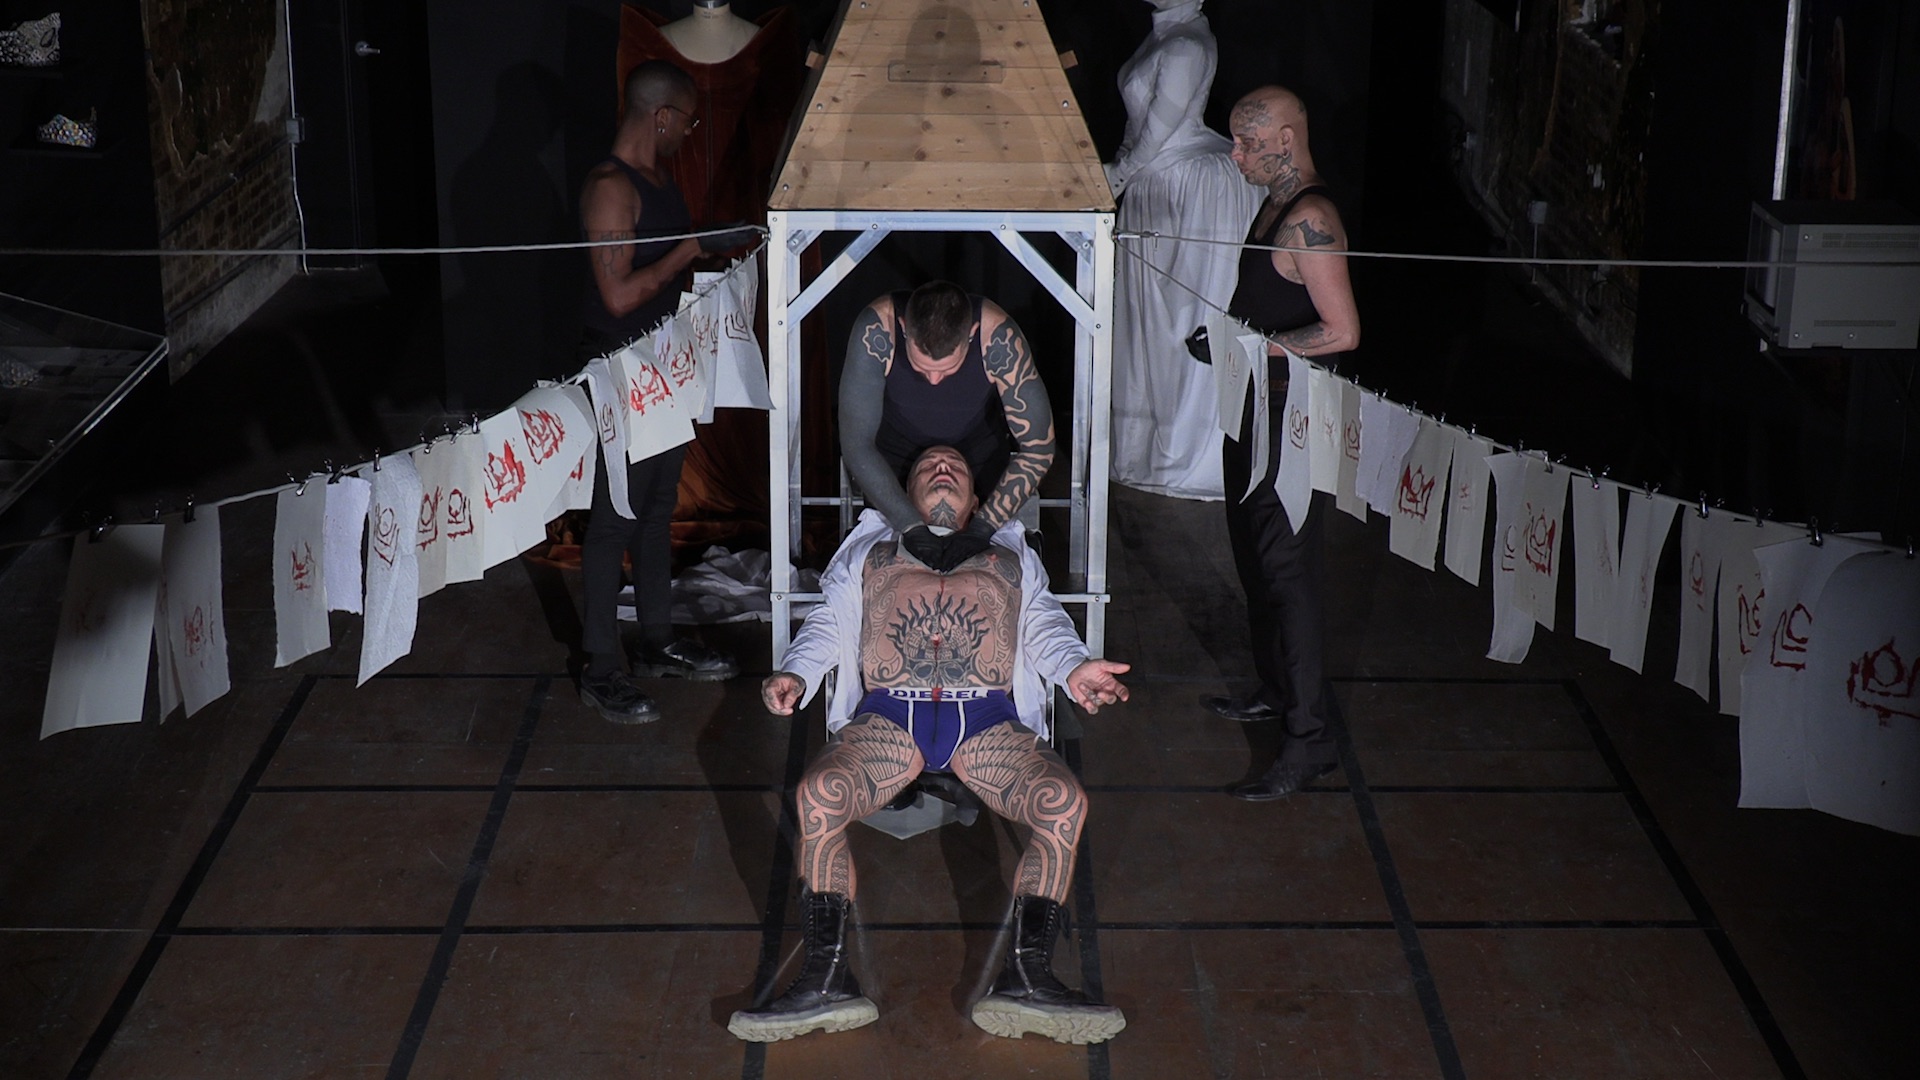 Ron Athey with Hermes Pittakos, Mecca, and Elliot Reed, *Performance at Participant in 3 Acts*, 2021. Video still: Glen Fogel. As part of *Queer Communion: Ron Athey*, curated by Amelia Jones, Participant Inc, New York, 2021.